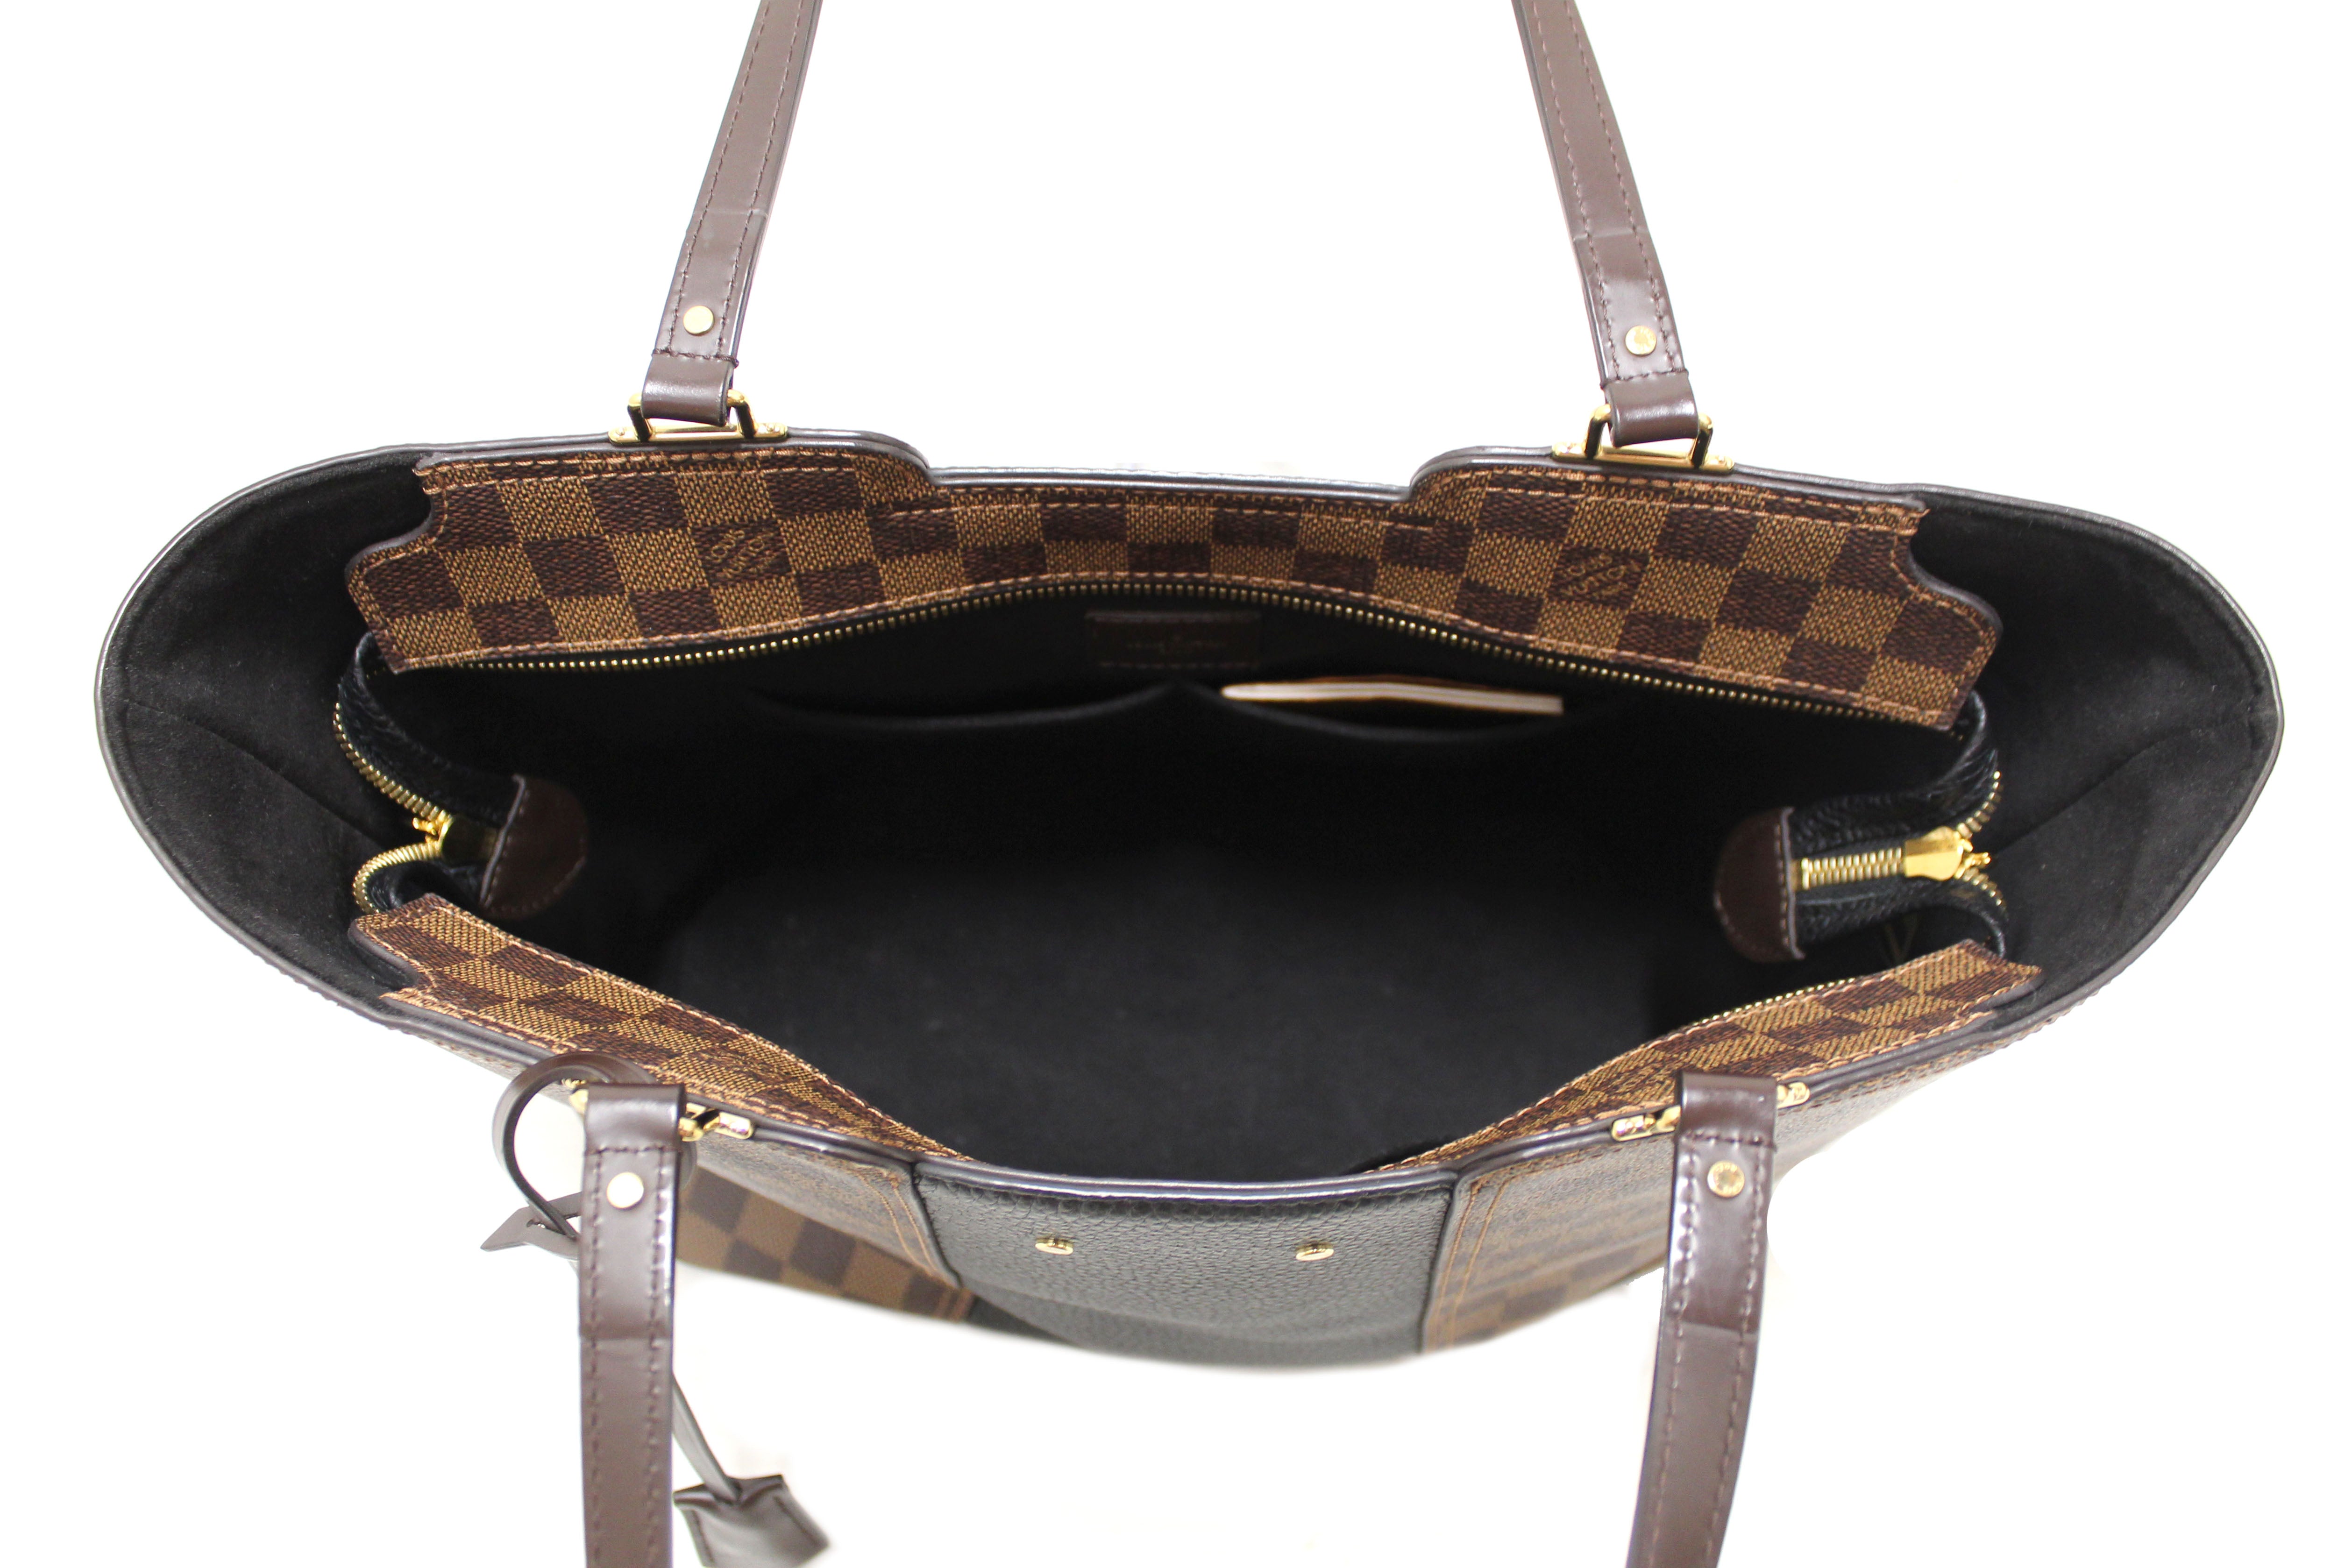 Authentic Louis Vuitton Damier Ebene with Black Leather Jersey Tote Bag